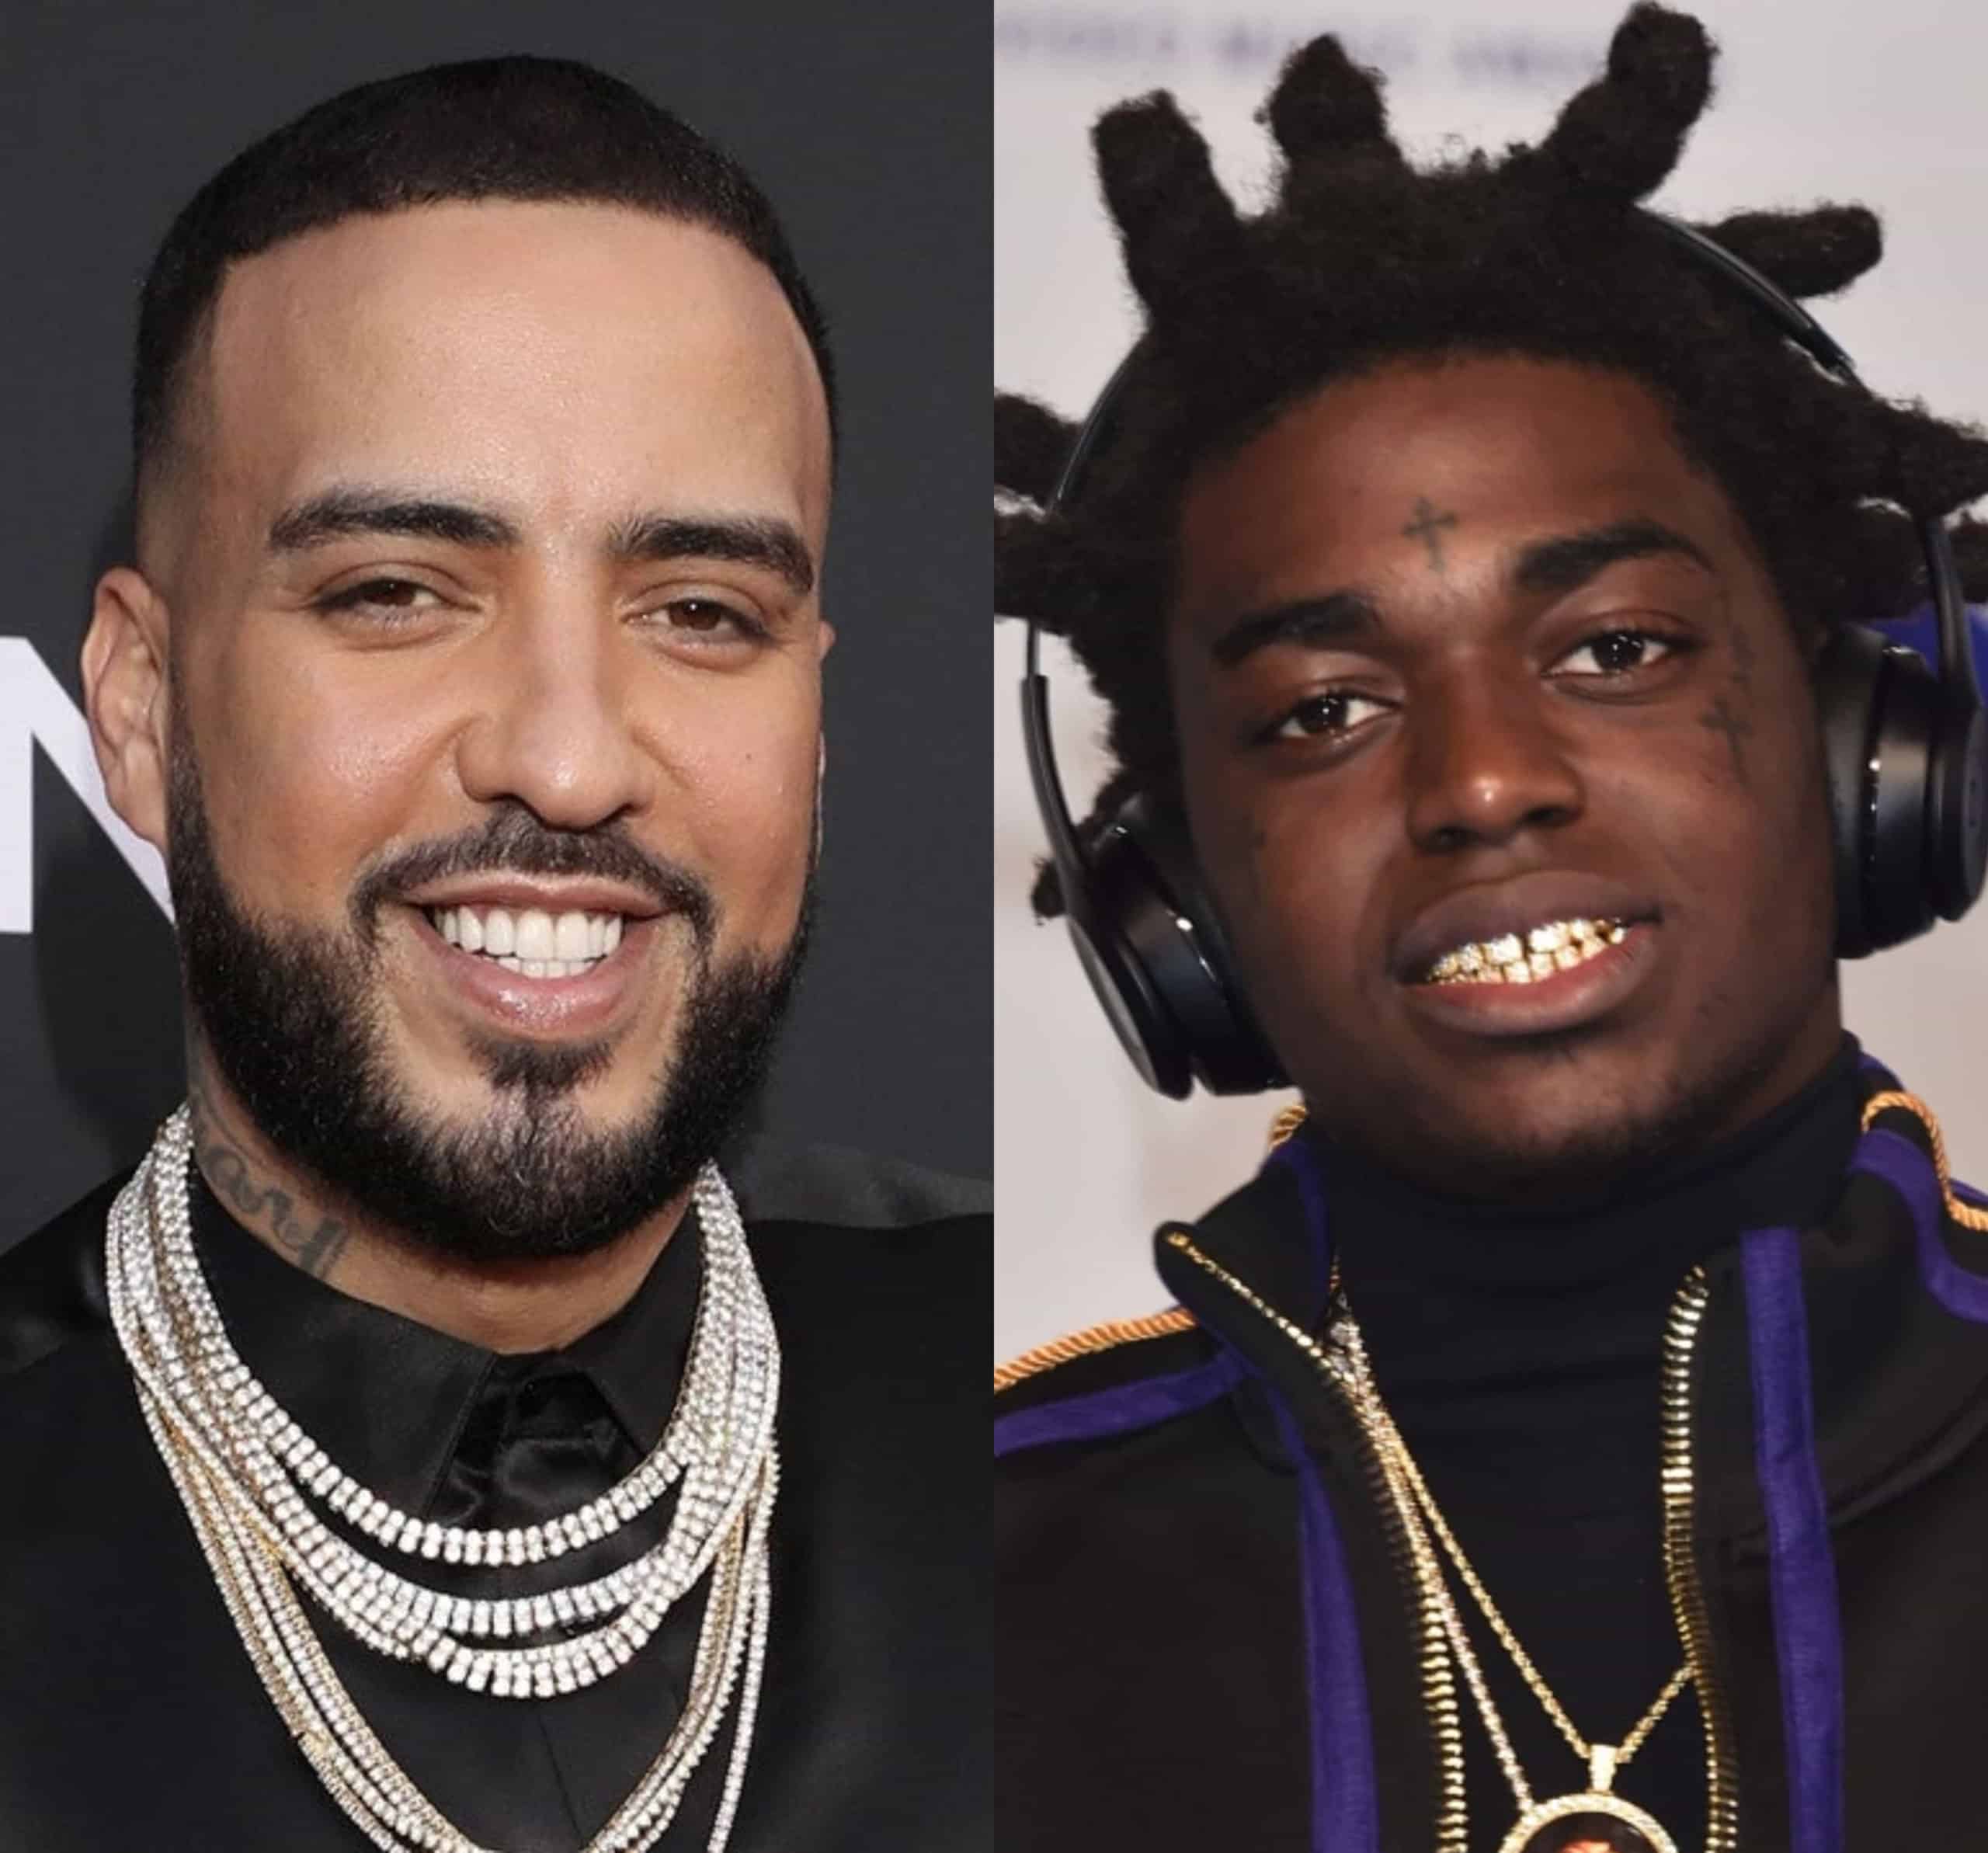 After Kanye West, French Montana Now Gifts Coke Boys Sneakers To Kodak Black